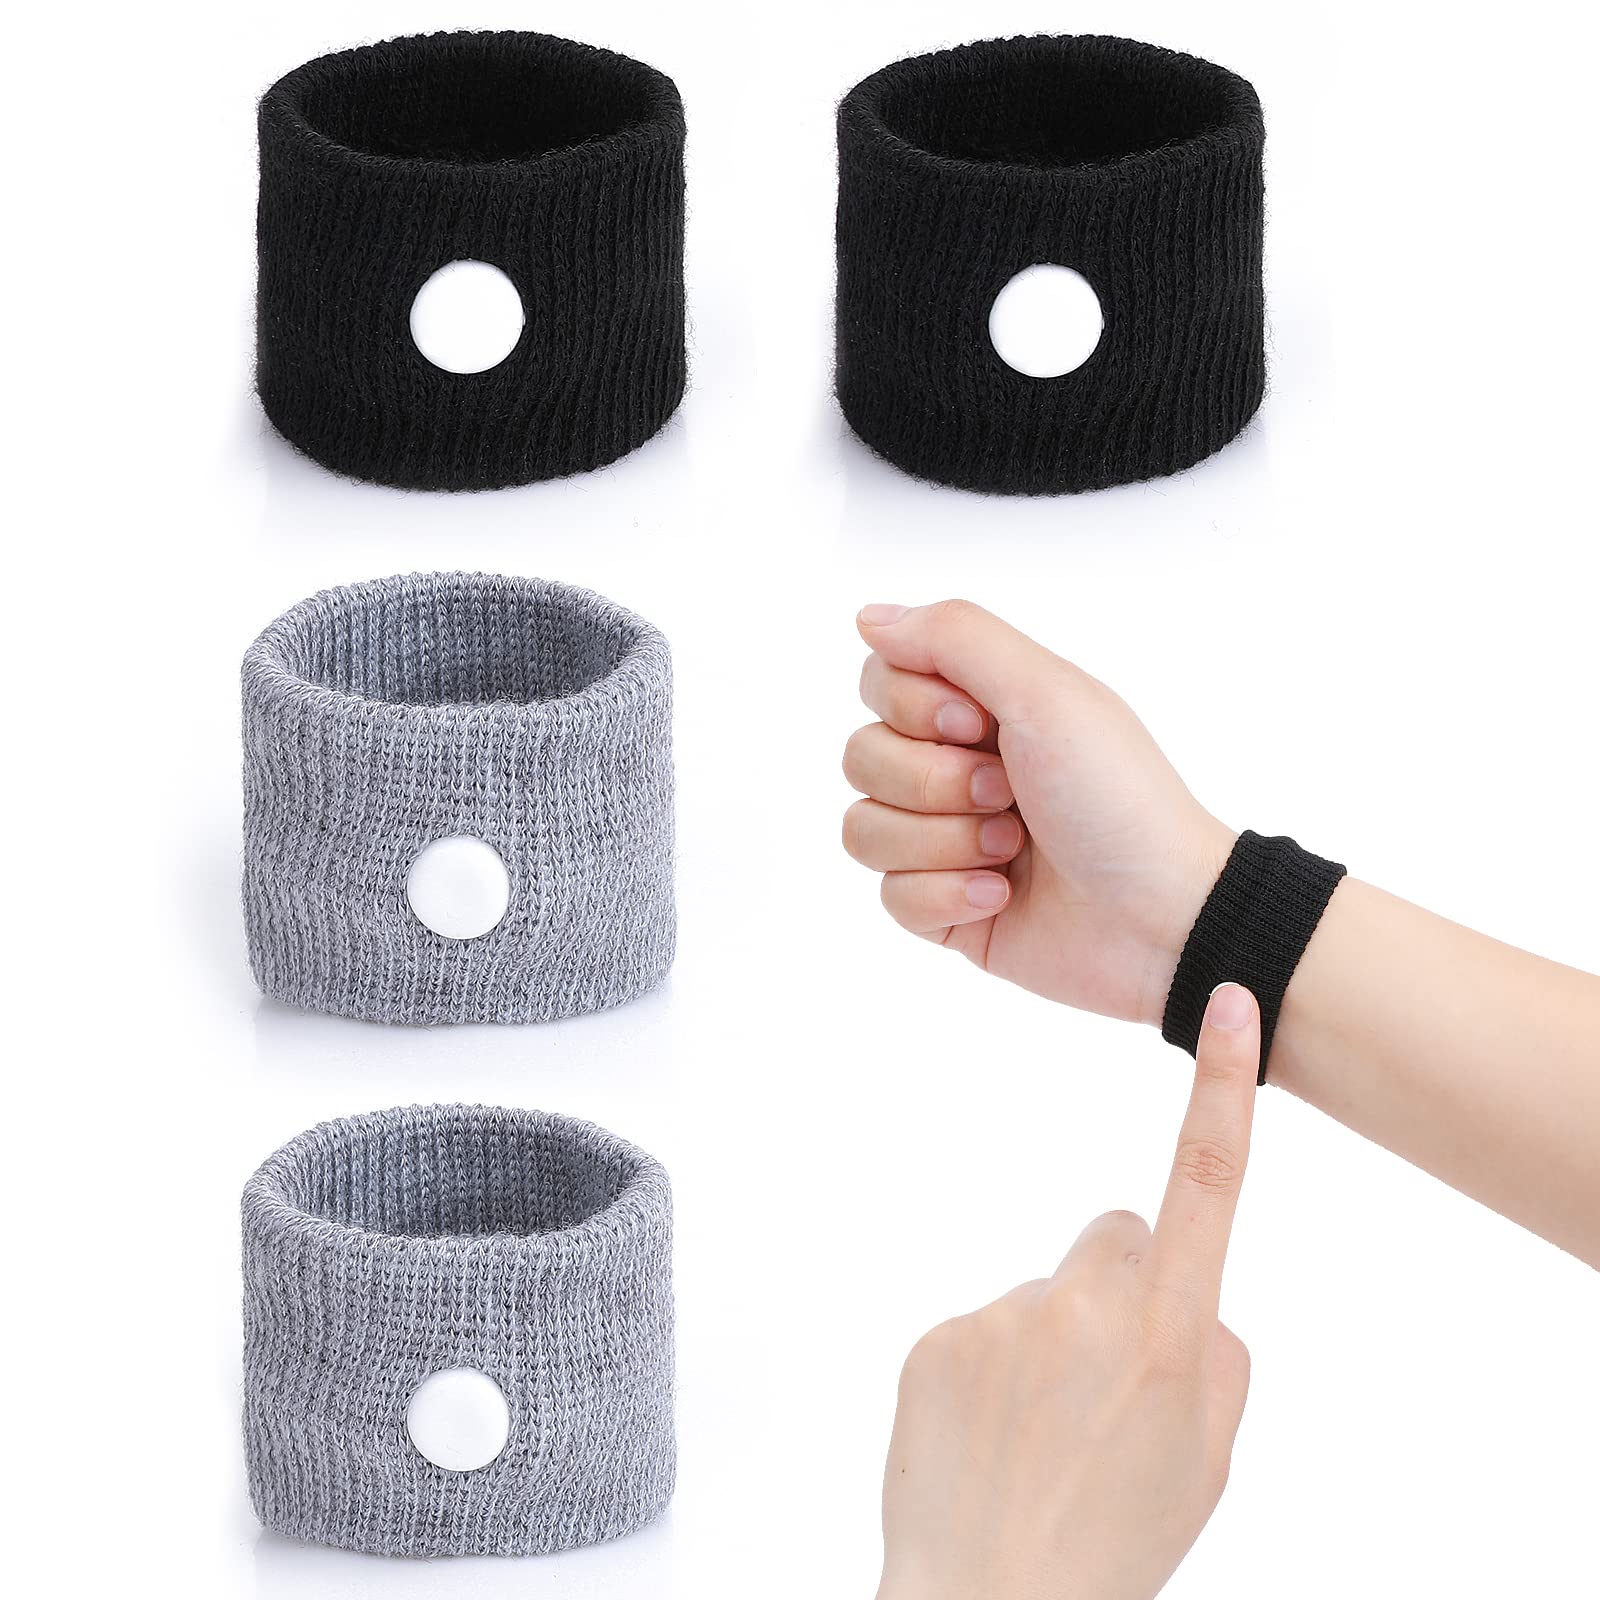 SUNCHARM Acupressure Wristband for Natural Relief of Headaches, Insomnia,  Anxiety, and Nausea. Sleep Aid - Motion and Morning Sickness - Panic  Attacks - Migraines (Grey) - Walmart.com